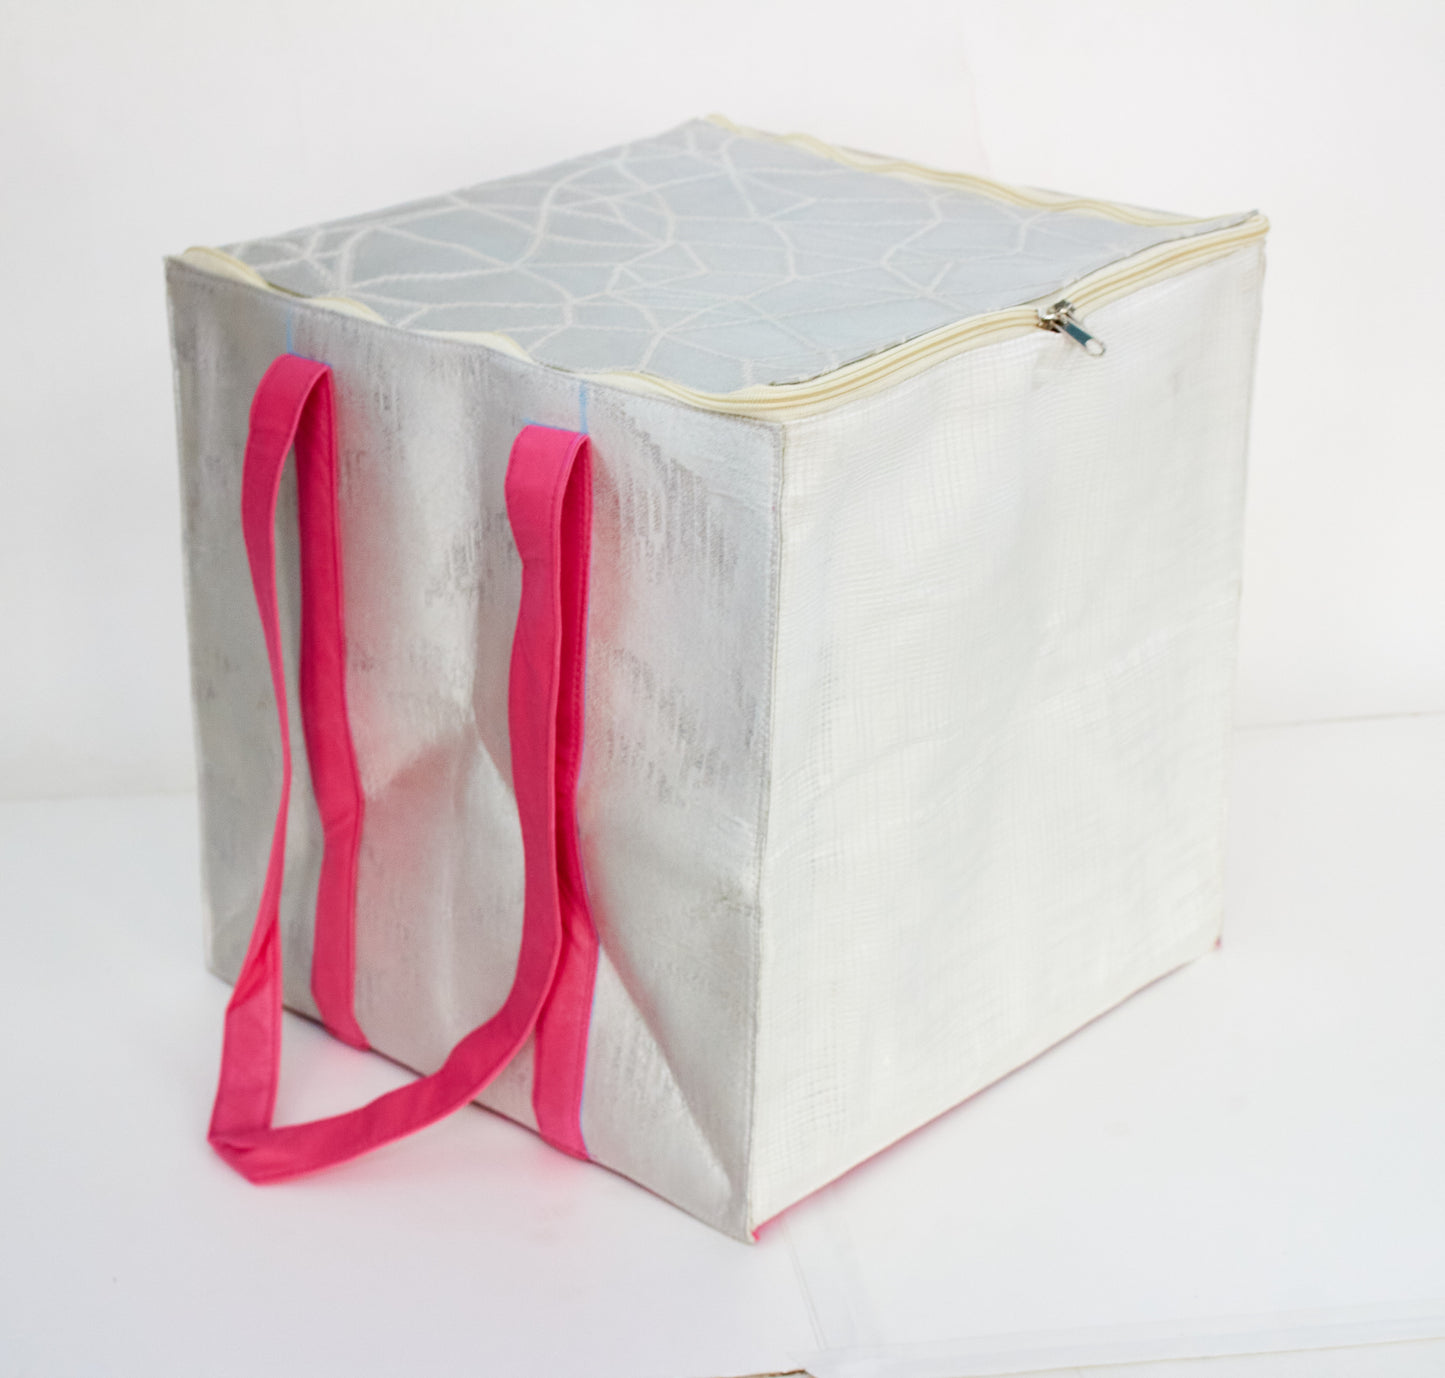 Foldable Box Bag - Made by People with Disabilities